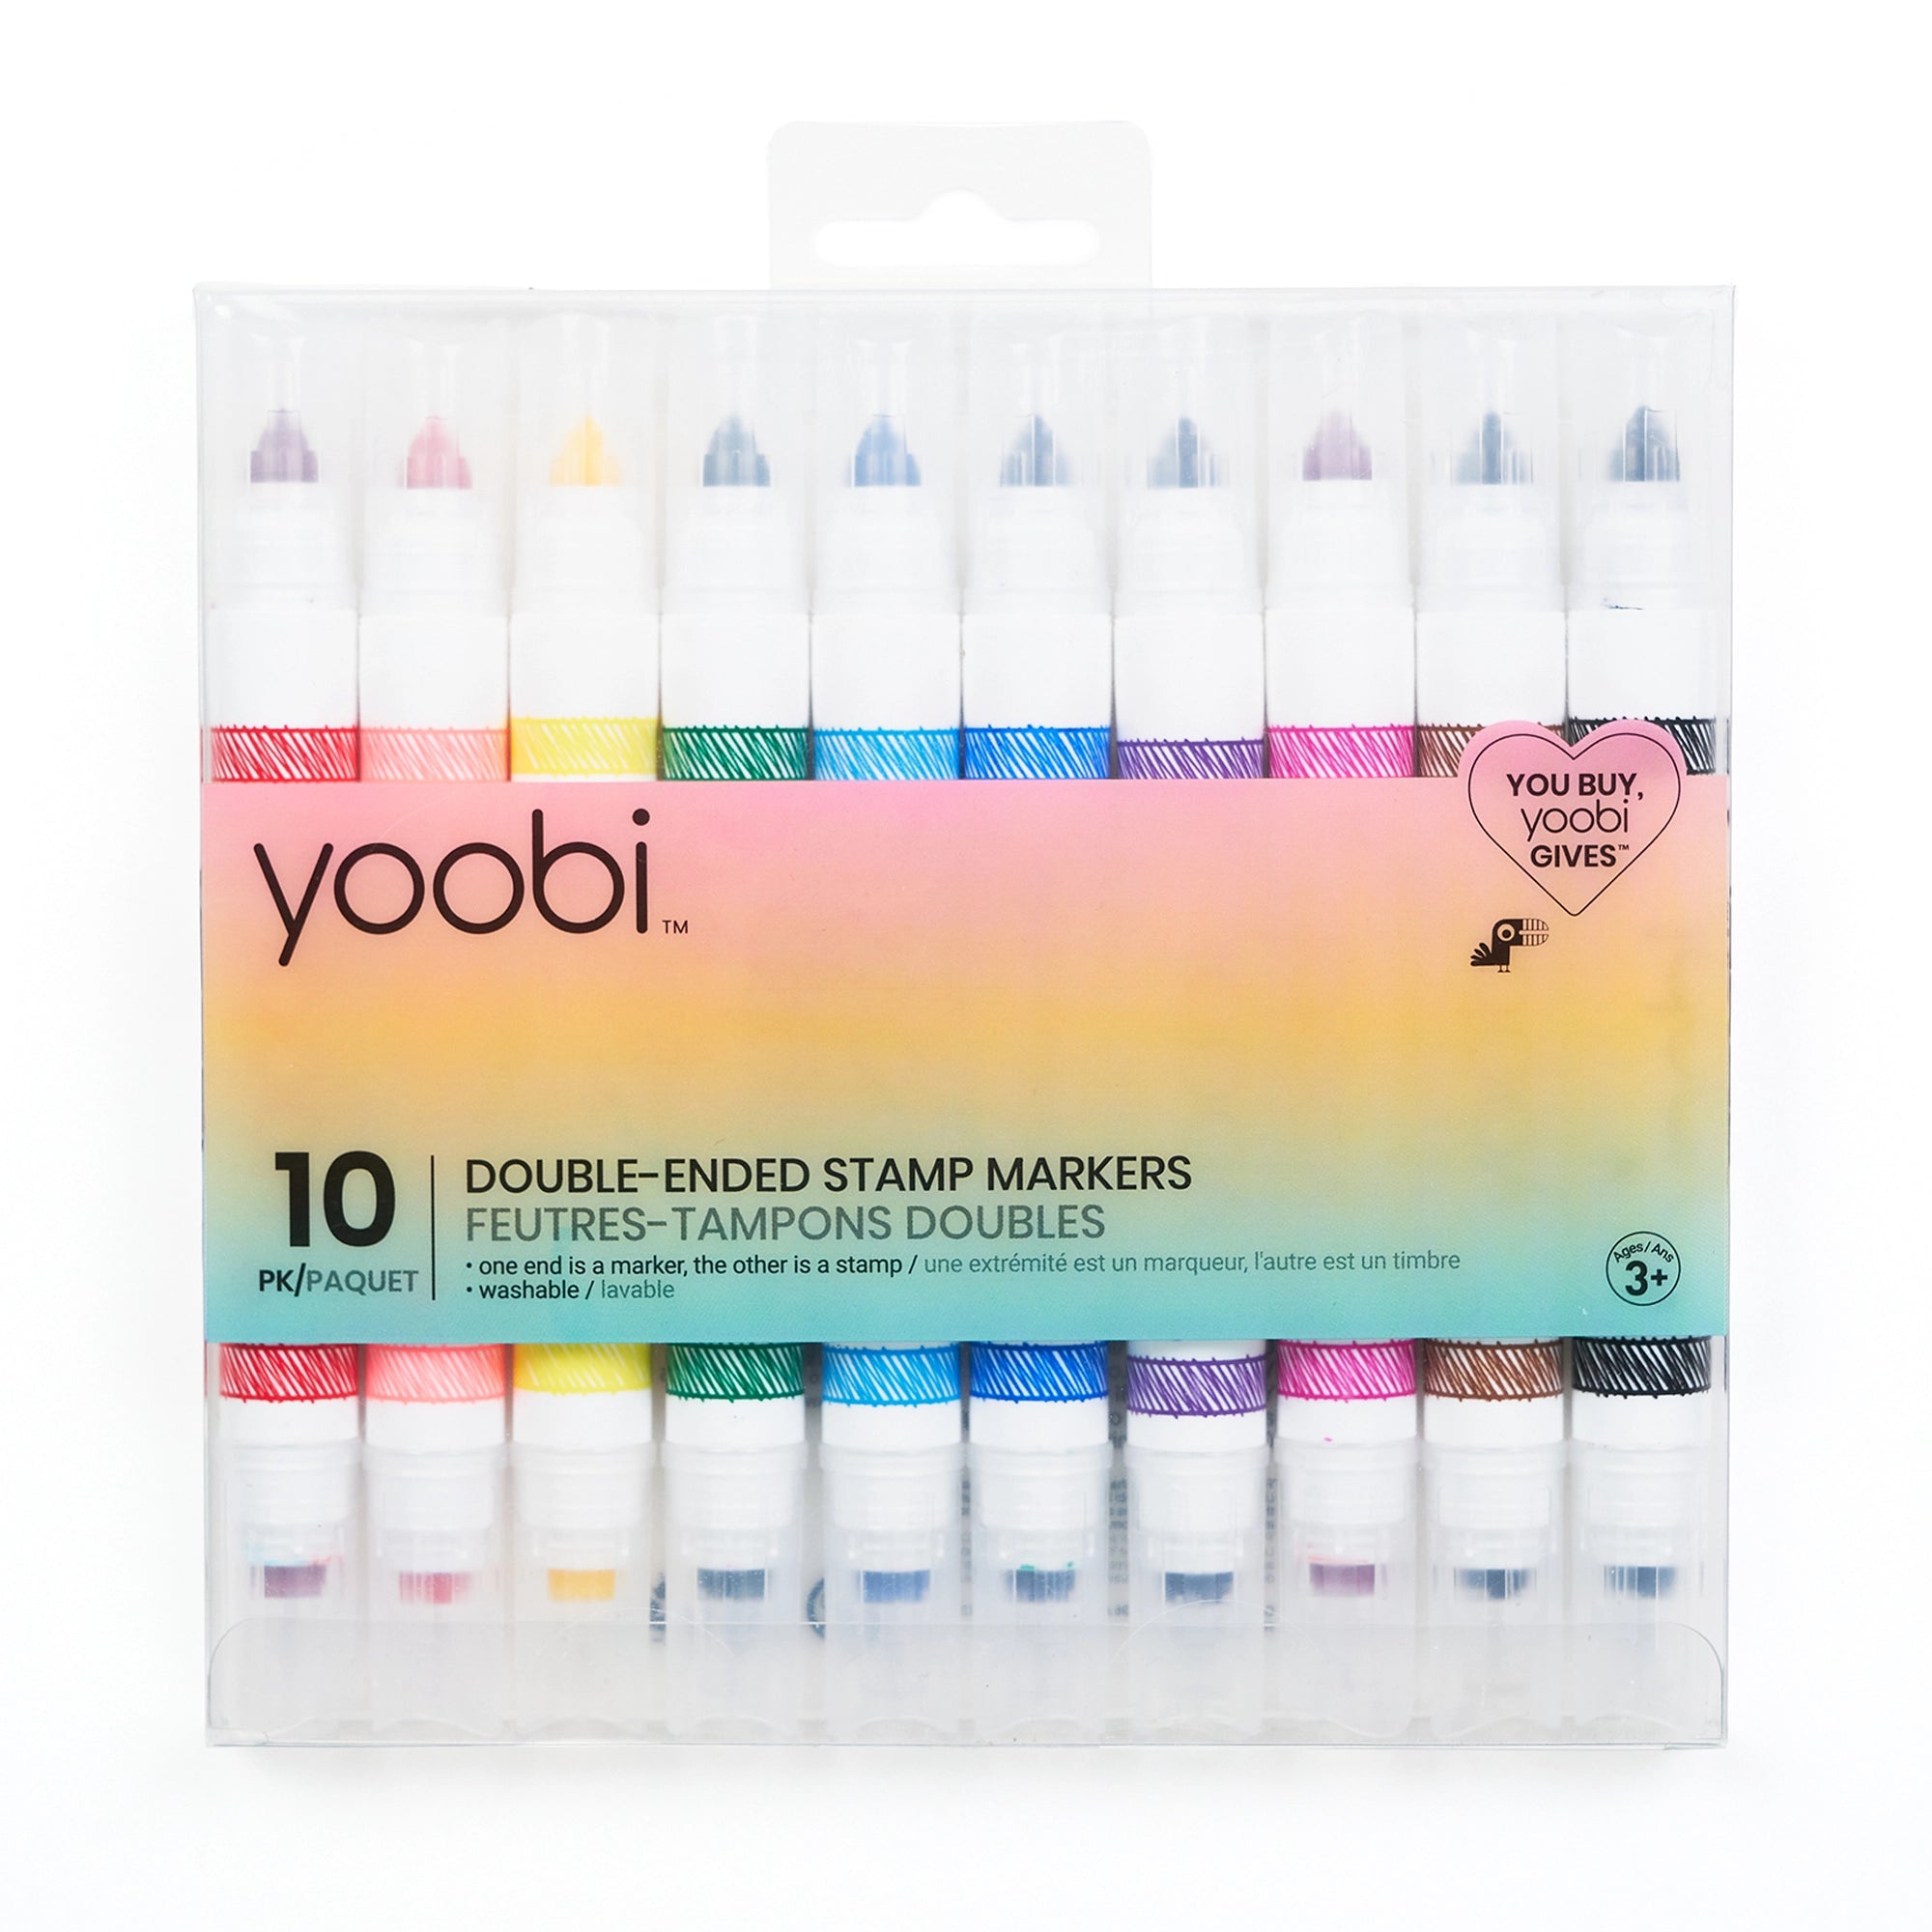 DOUBLE-ENDED STAMP MARKERS